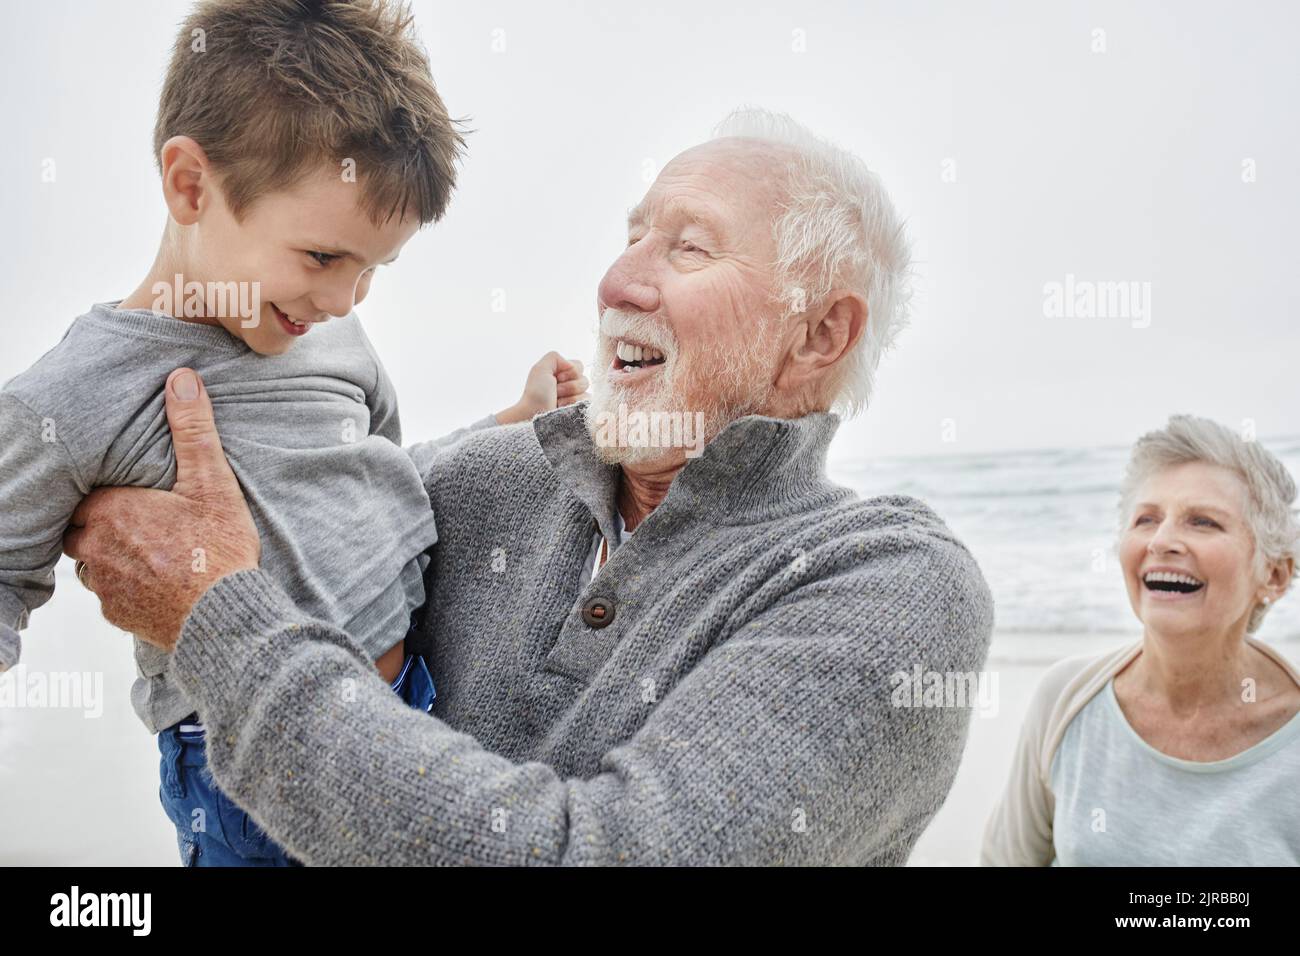 Happy grandparents spending quality time on the beach with grandson Stock Photo